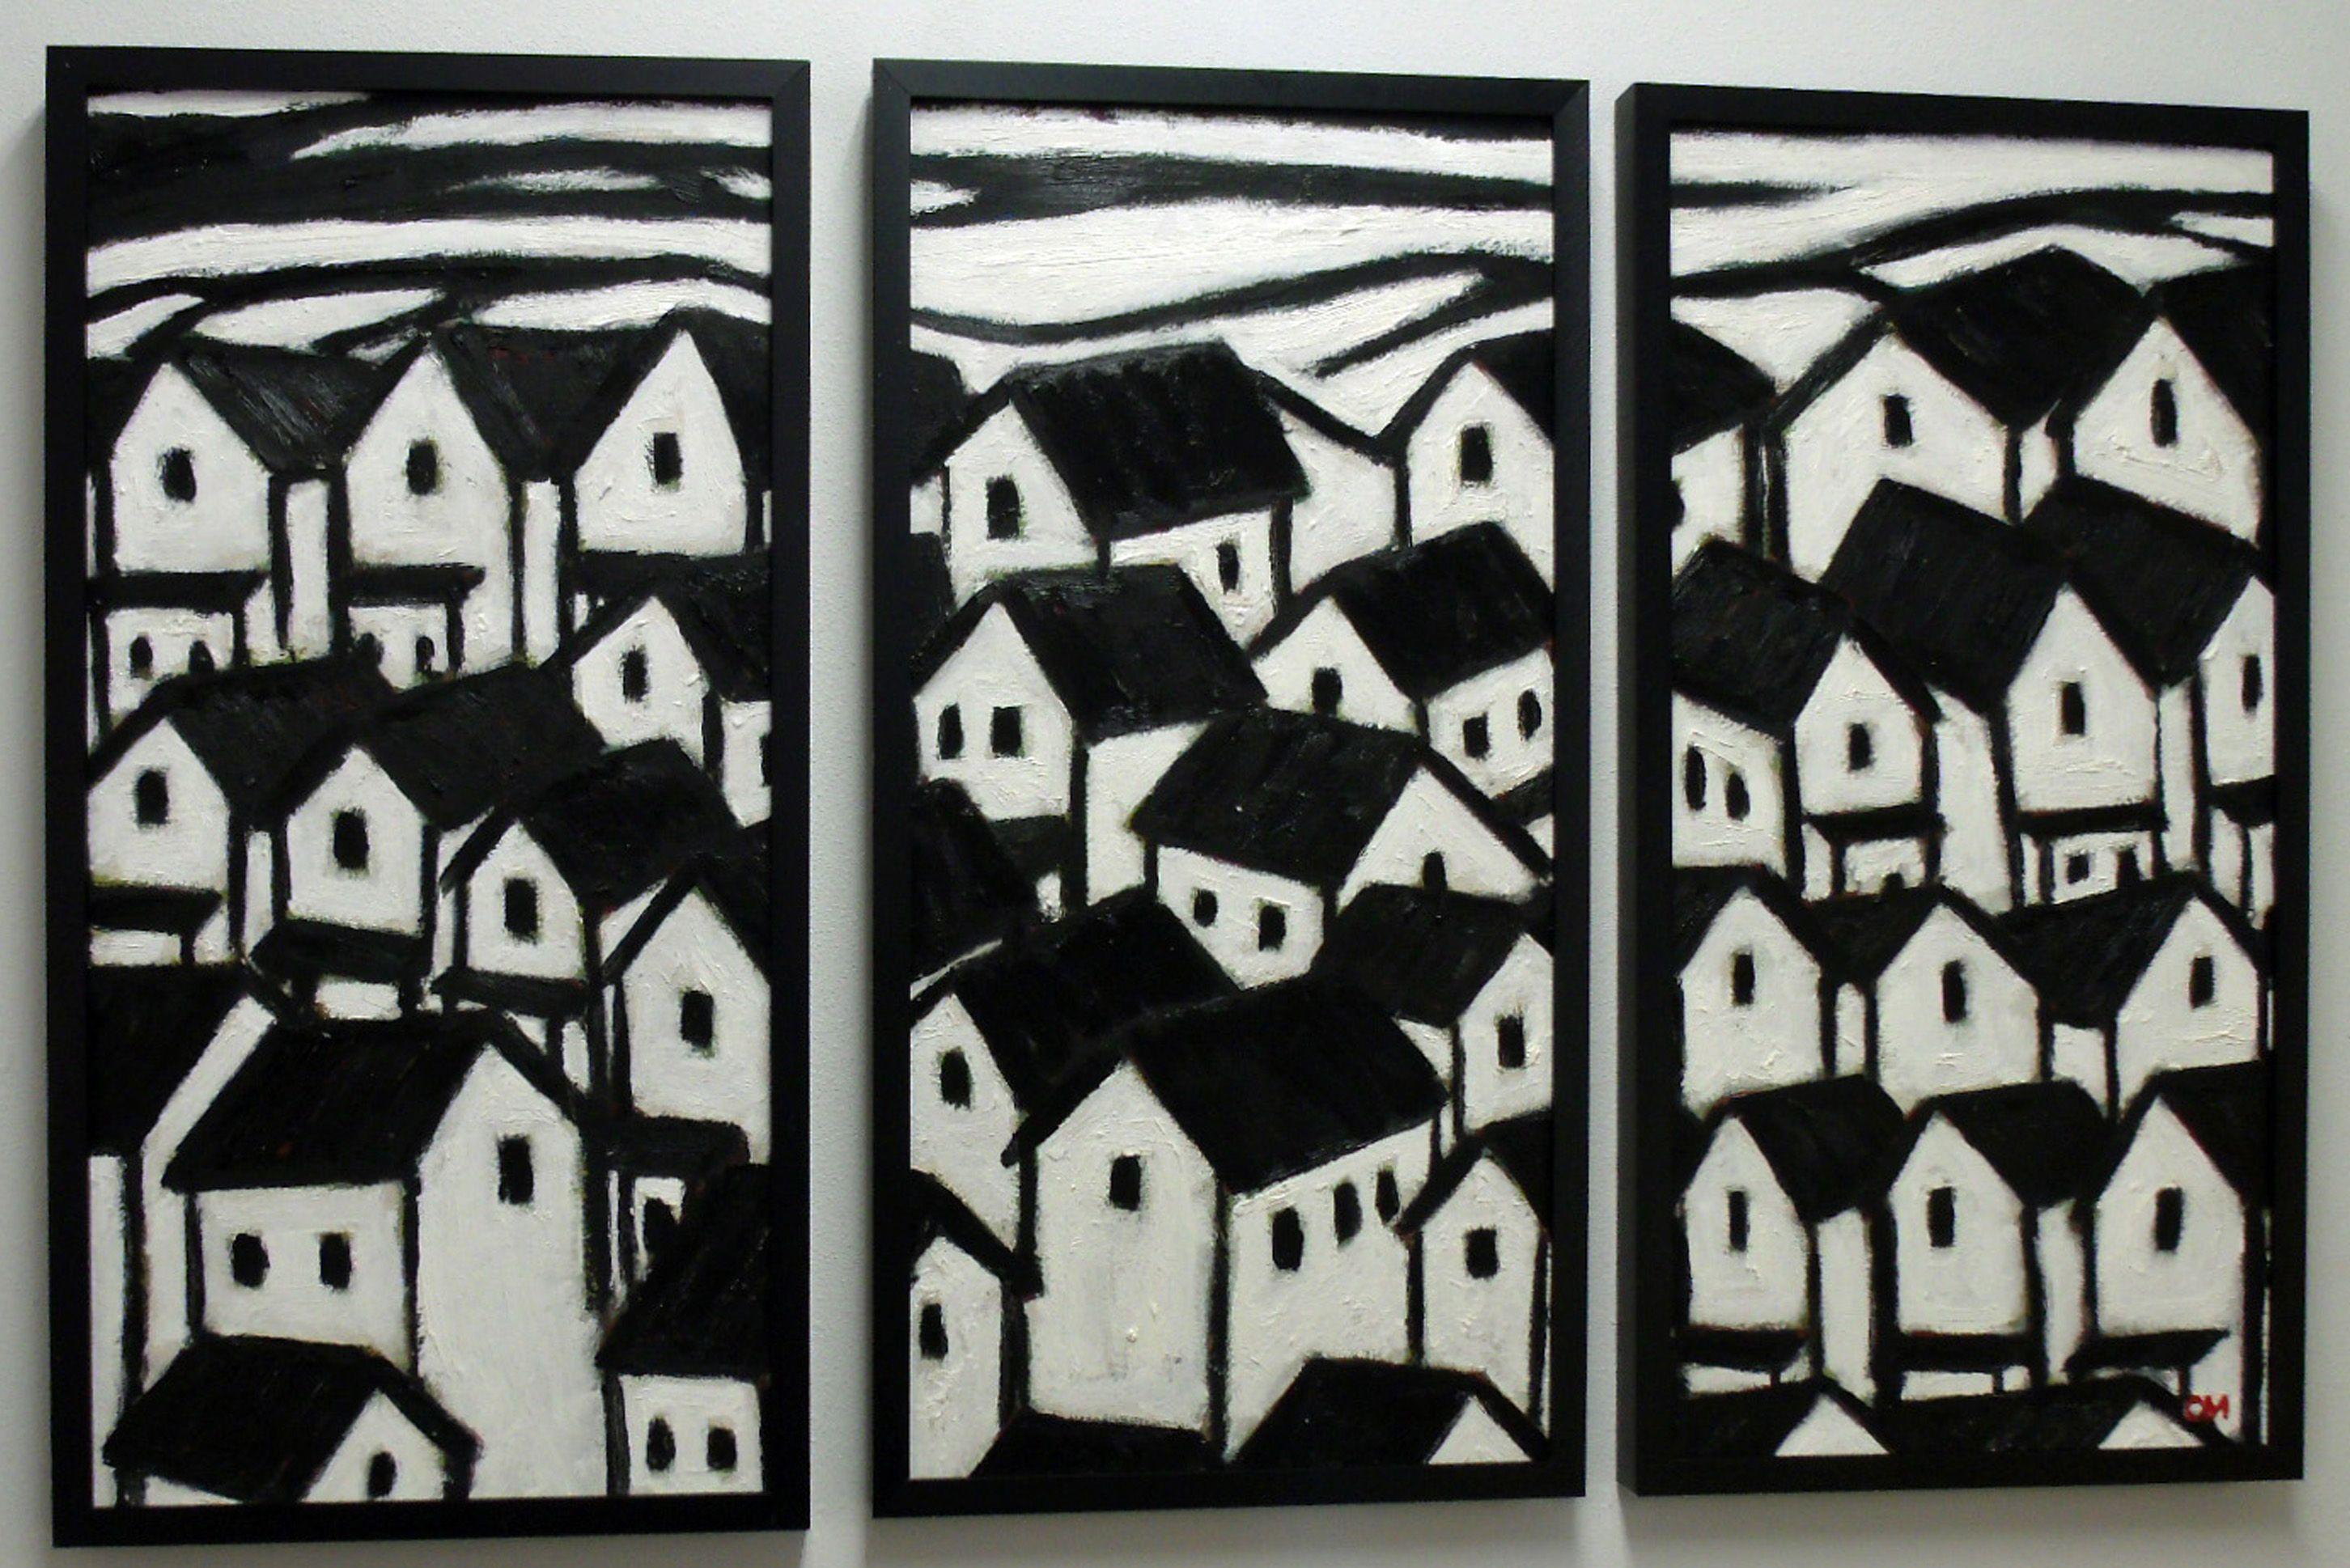 A mountainside in old industrial city stacked with roof tops reminiscent of old Europe. Strong black and white patterns and textured.  Each painting individually framed (3) 24in x 12in allowing 1-incn spacing.  Note: The room mock-ups the painting